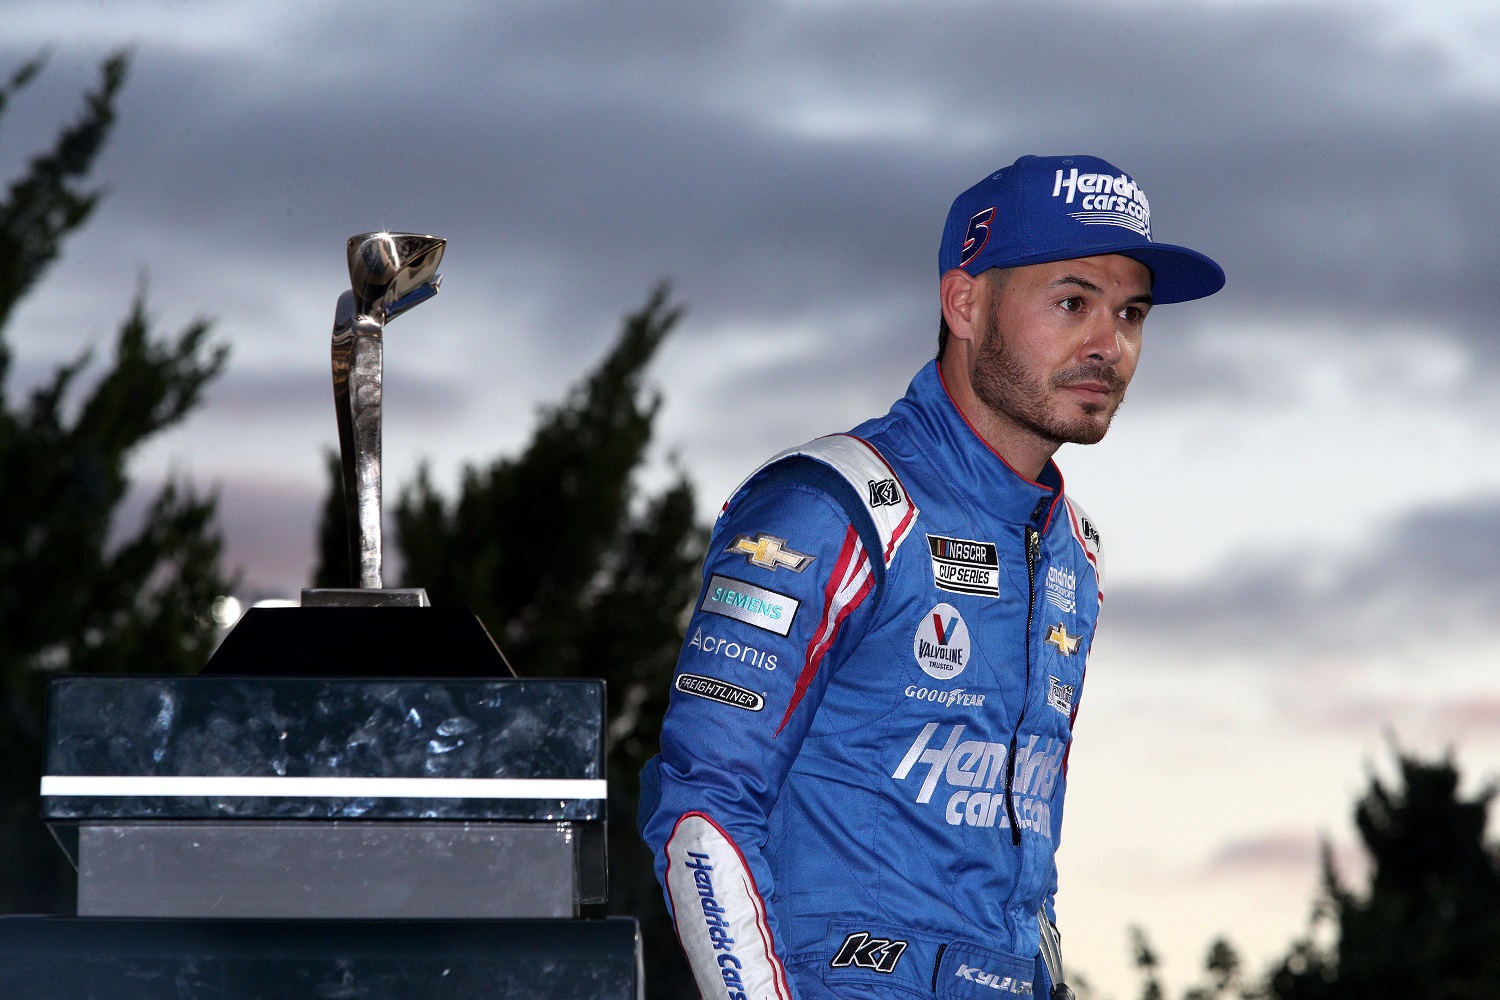 Kyle Larson, driver of the No. 5 Chevy, looks on from victory lane after winning the NASCAR Cup Series Hollywood Casino 400 at Kansas Speedway on Oct. 24, 2021.